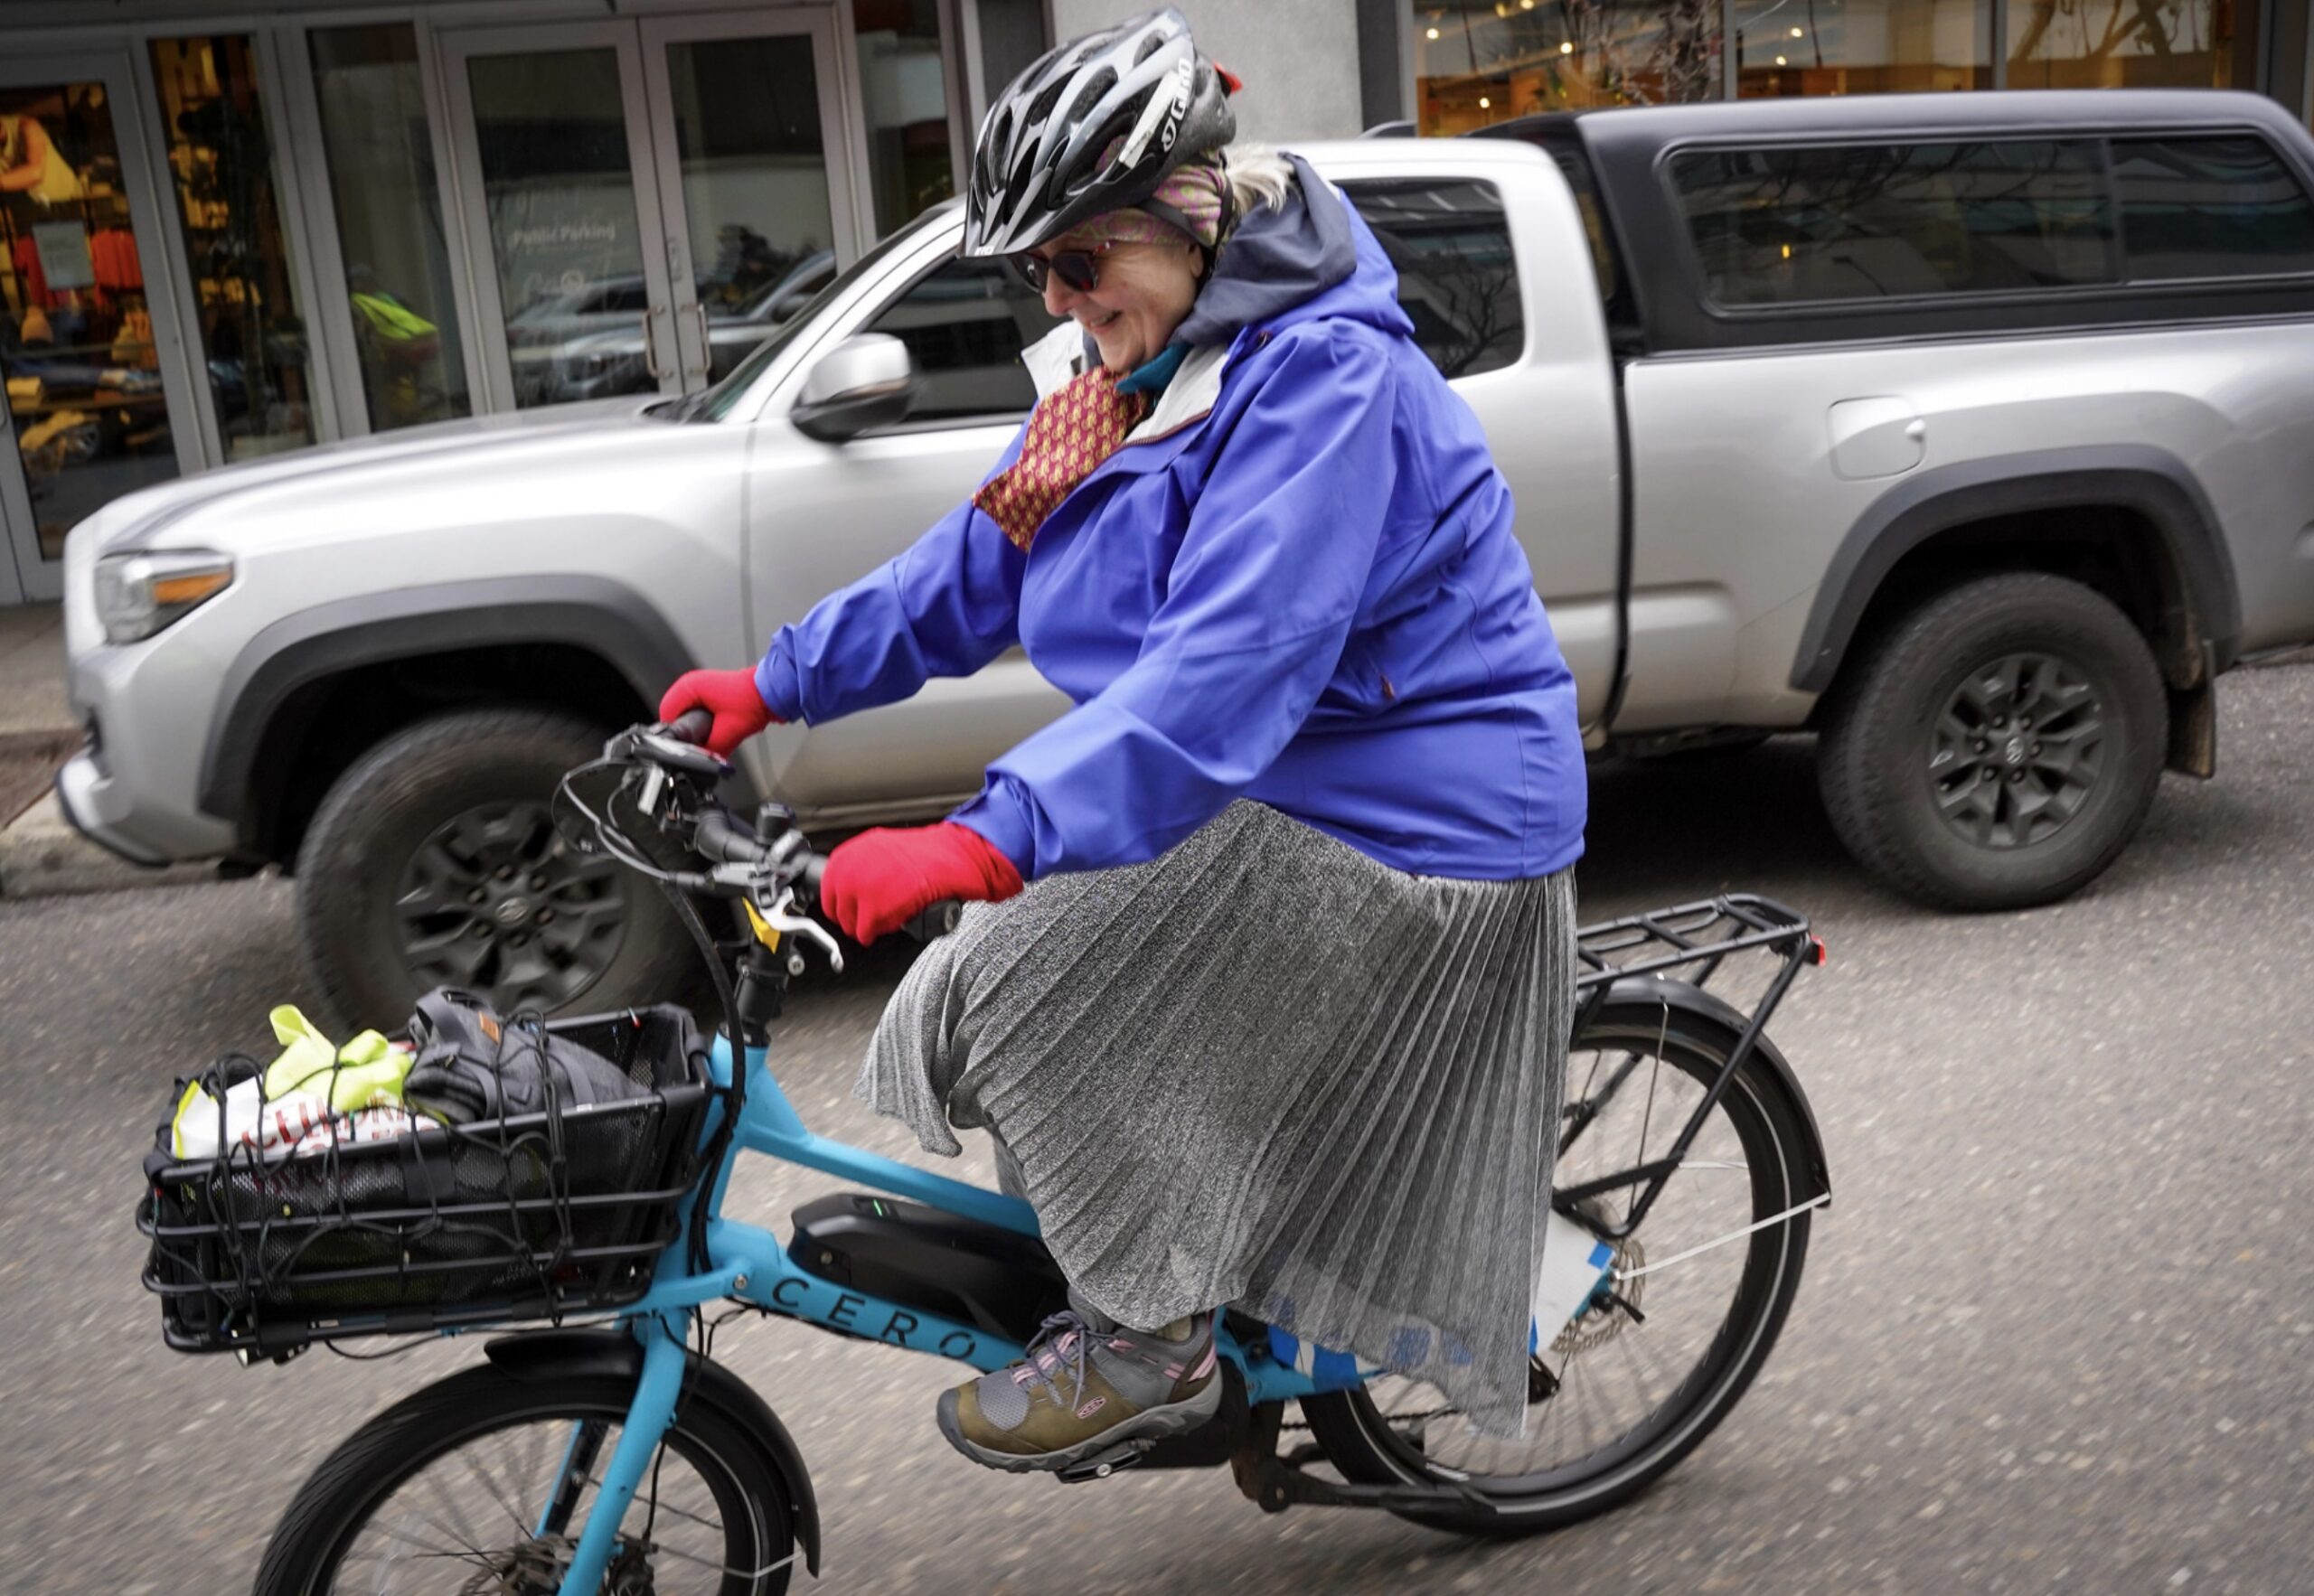 Person with a dress riding a bike on the street.